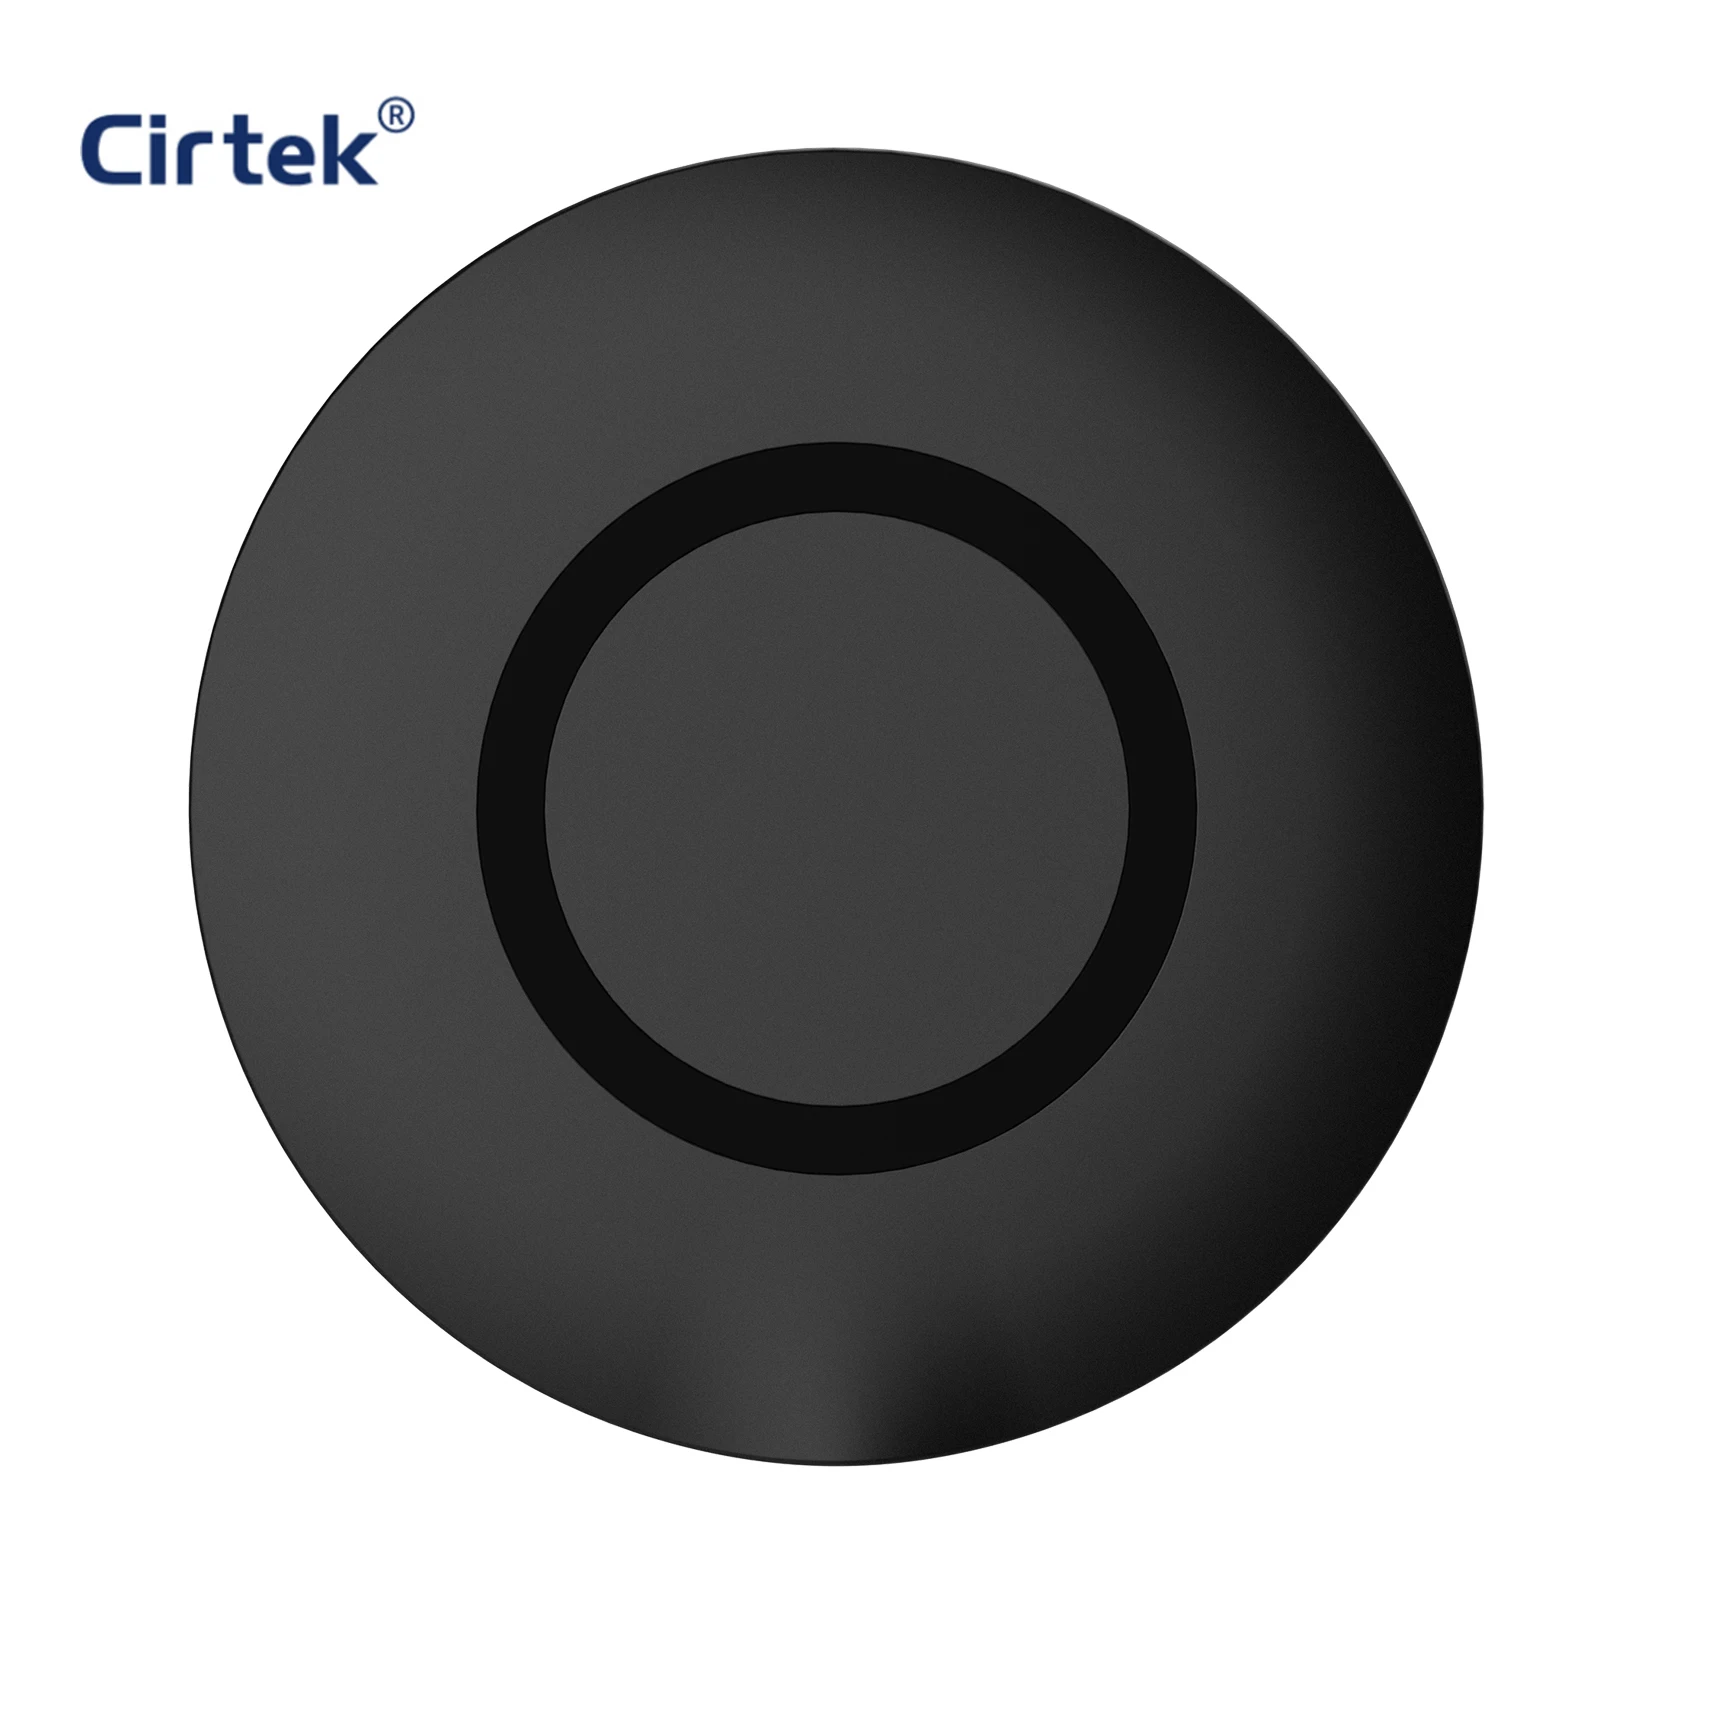 

Cirtek 15w universal compatible qi magic circle wireless fast charger CE Rohs FCC QI certified phone charger, Black